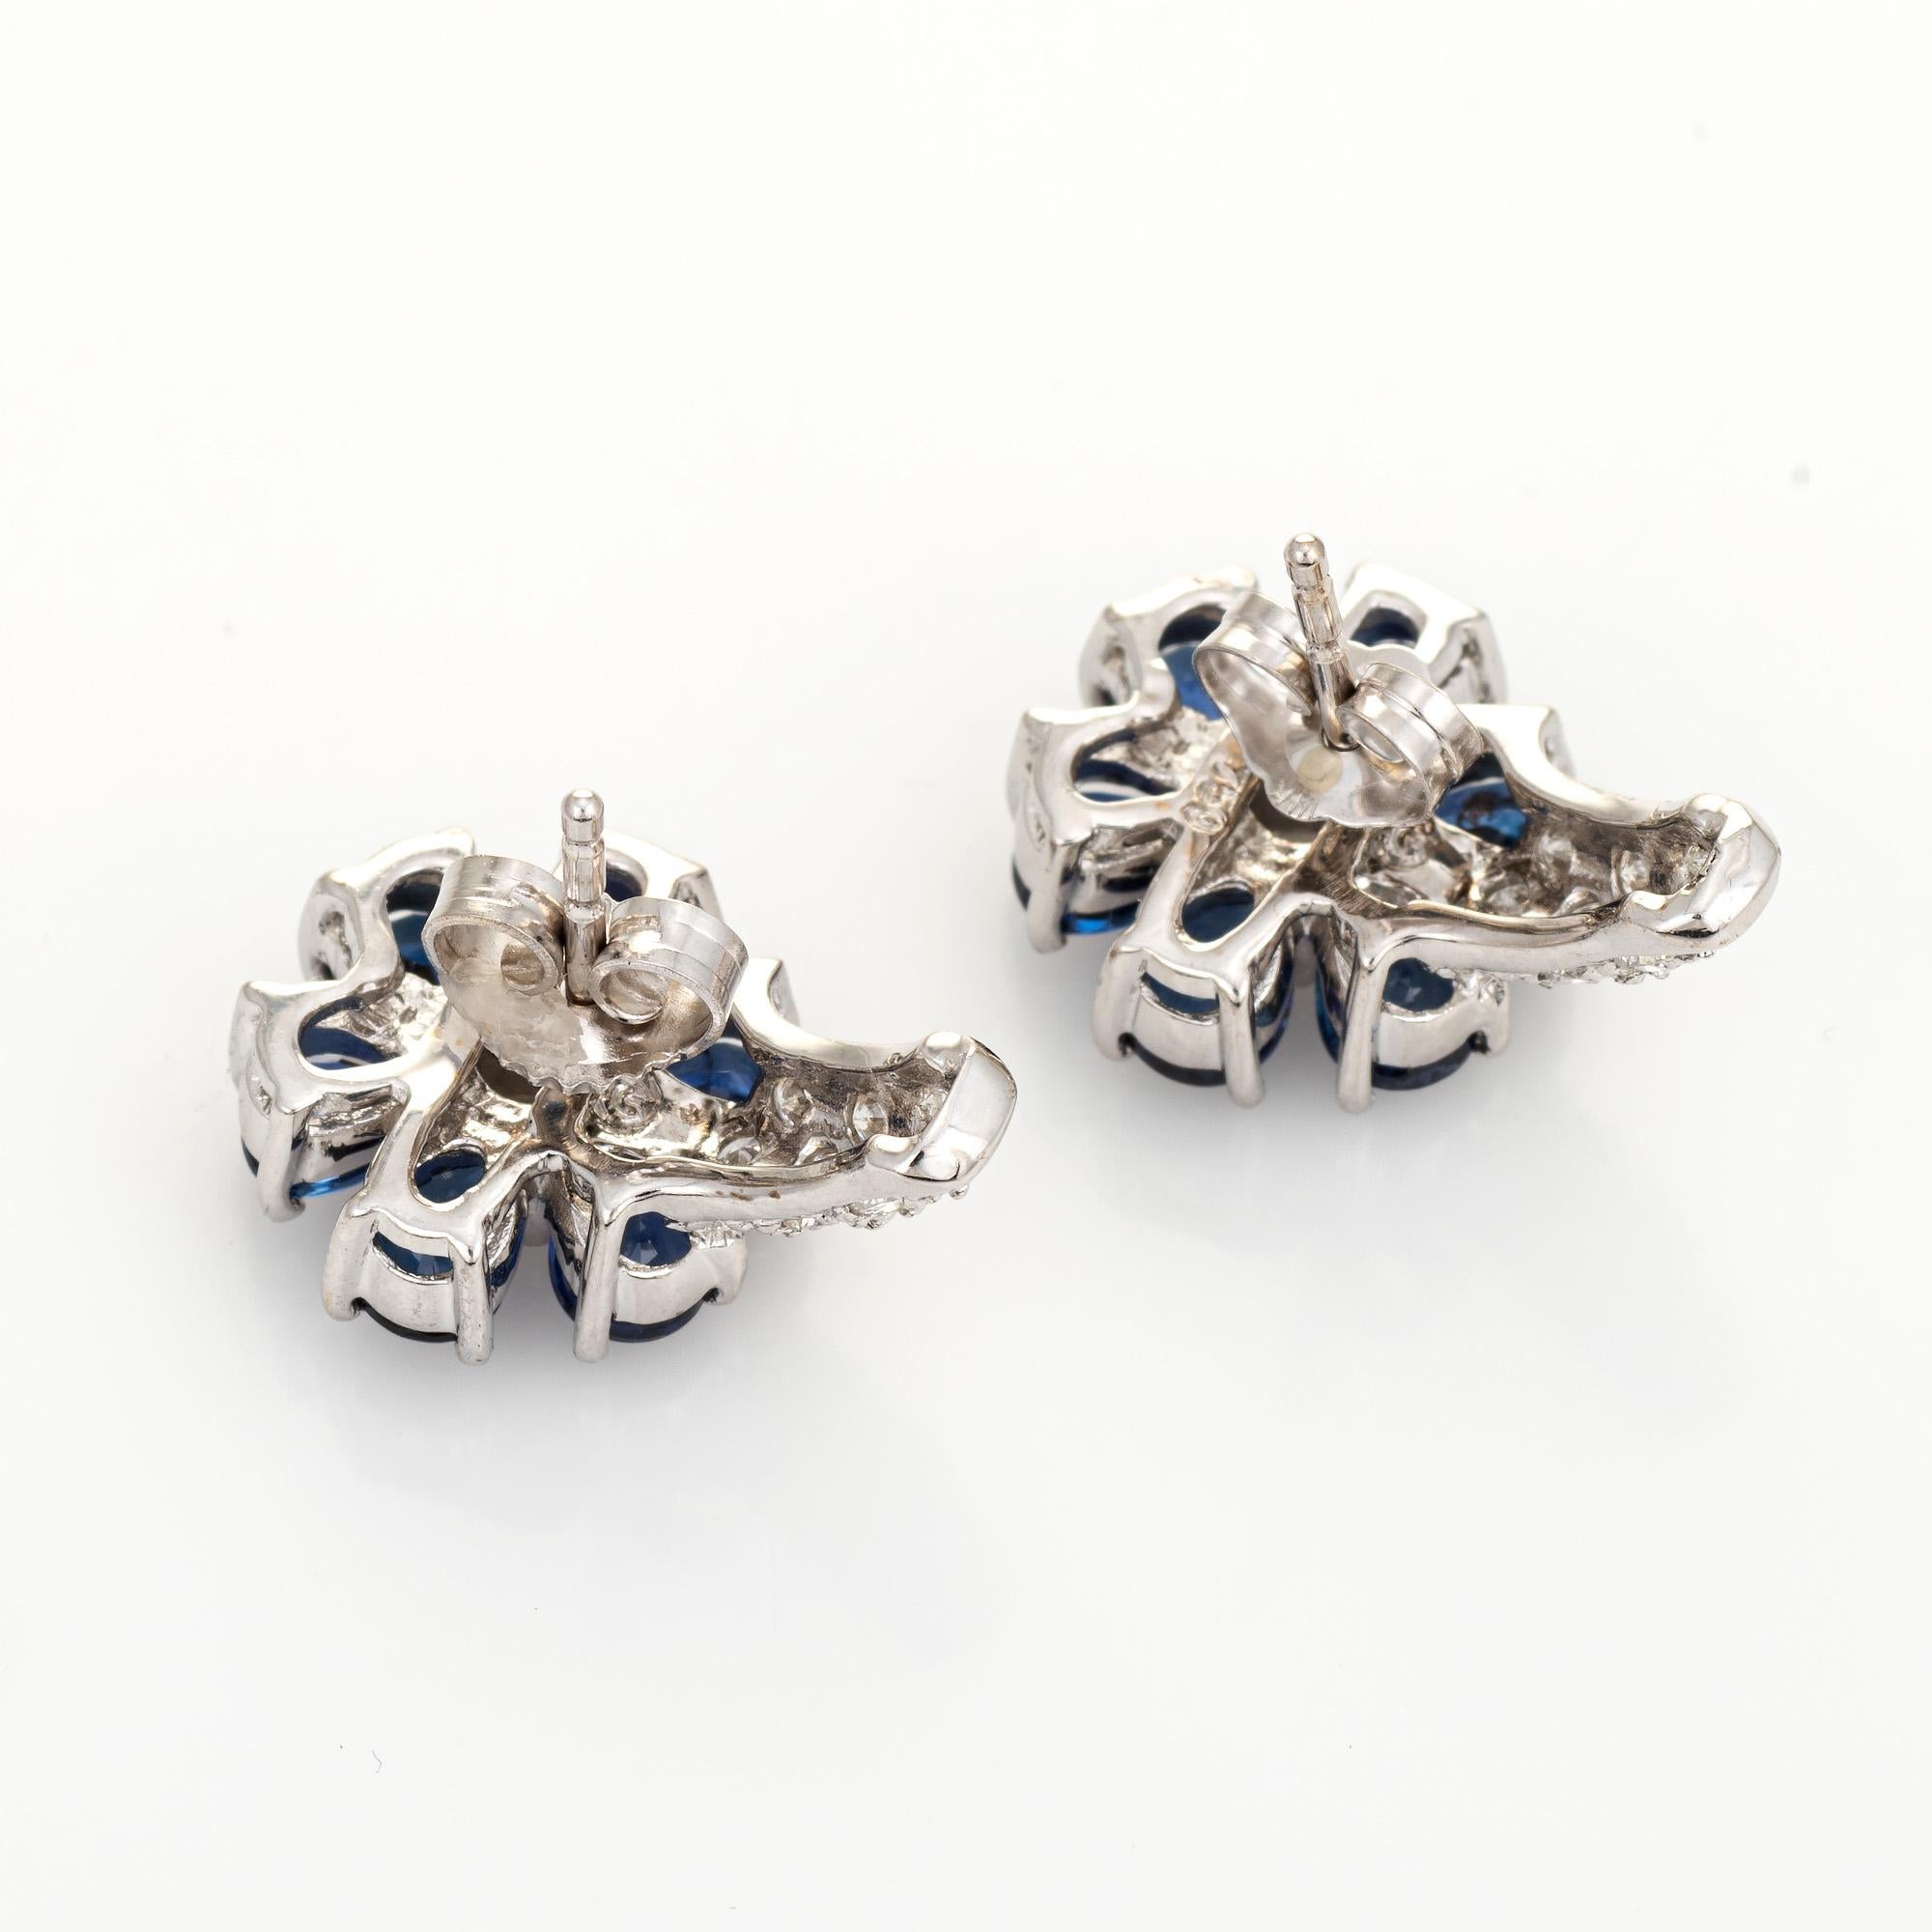 Elegant pair of blue sapphire & diamond shrimp earrings crafted in 18k white gold (circa 2000s). 

Faceted pear cut sapphires total an estimated 2.40 carats. Diamonds total an estimated 0.50 carats (estimated at H-I color and VS2-SI2 clarity). The